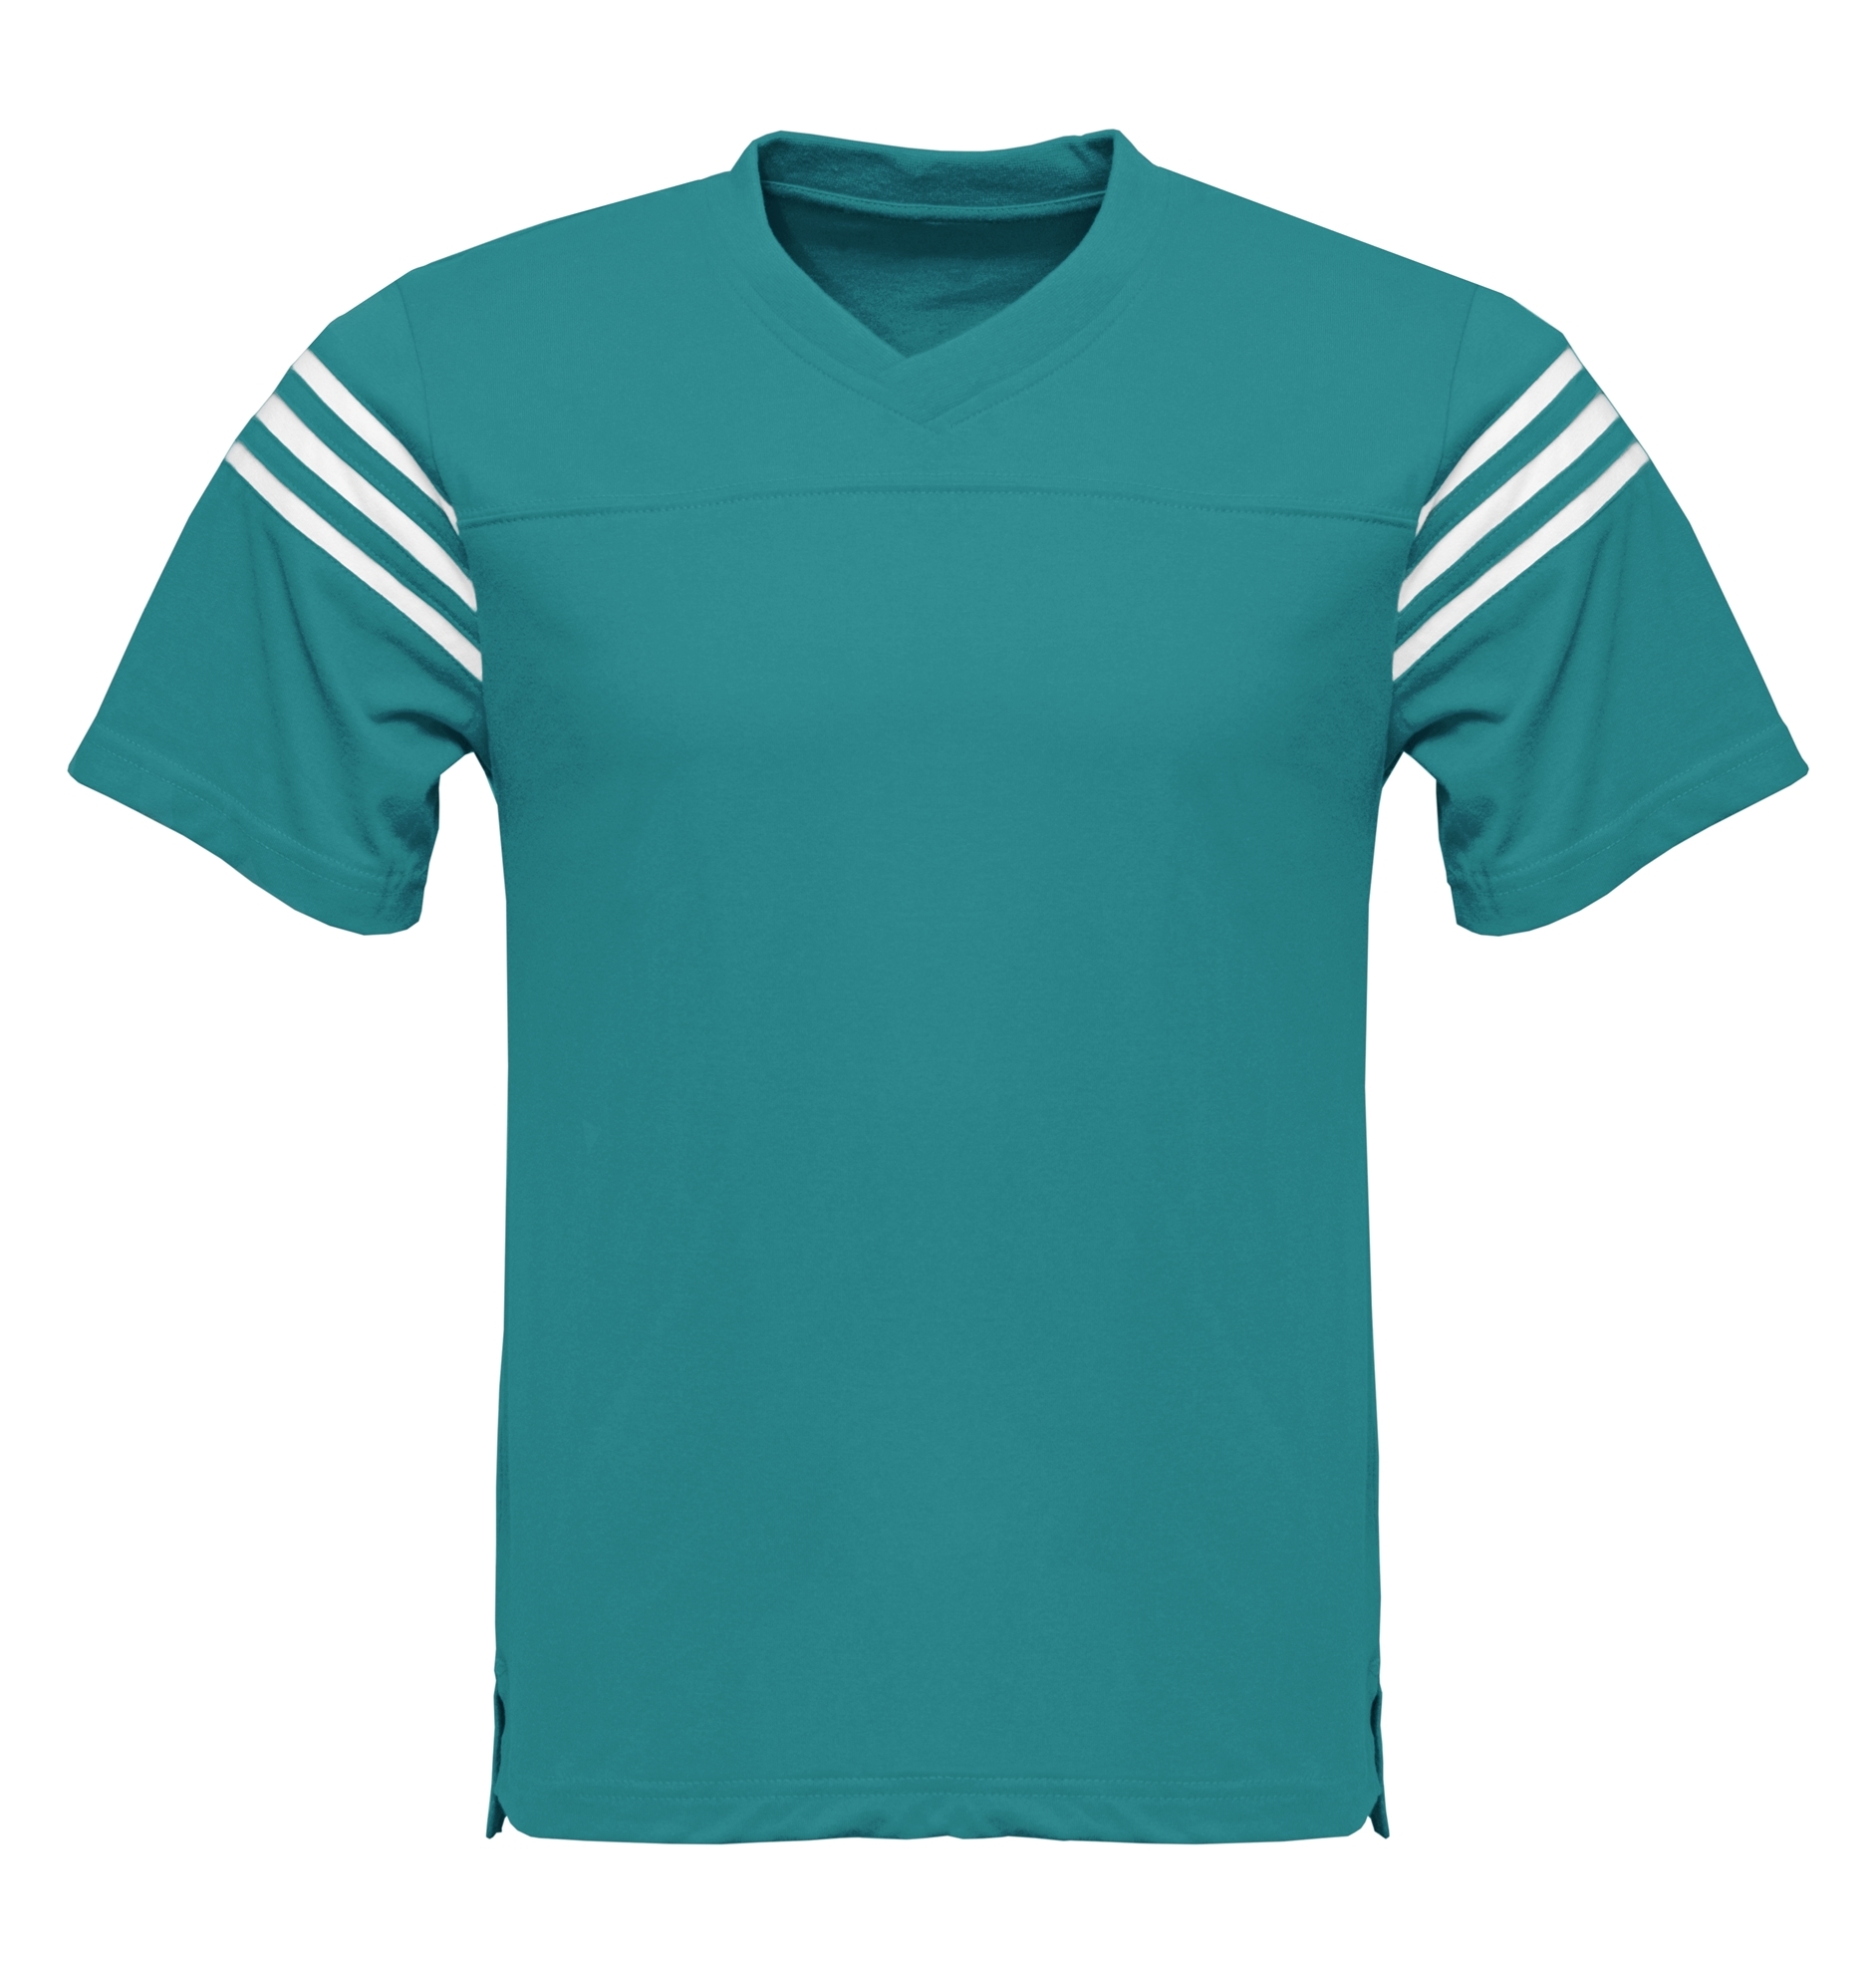 click to view TEAL/WHITE